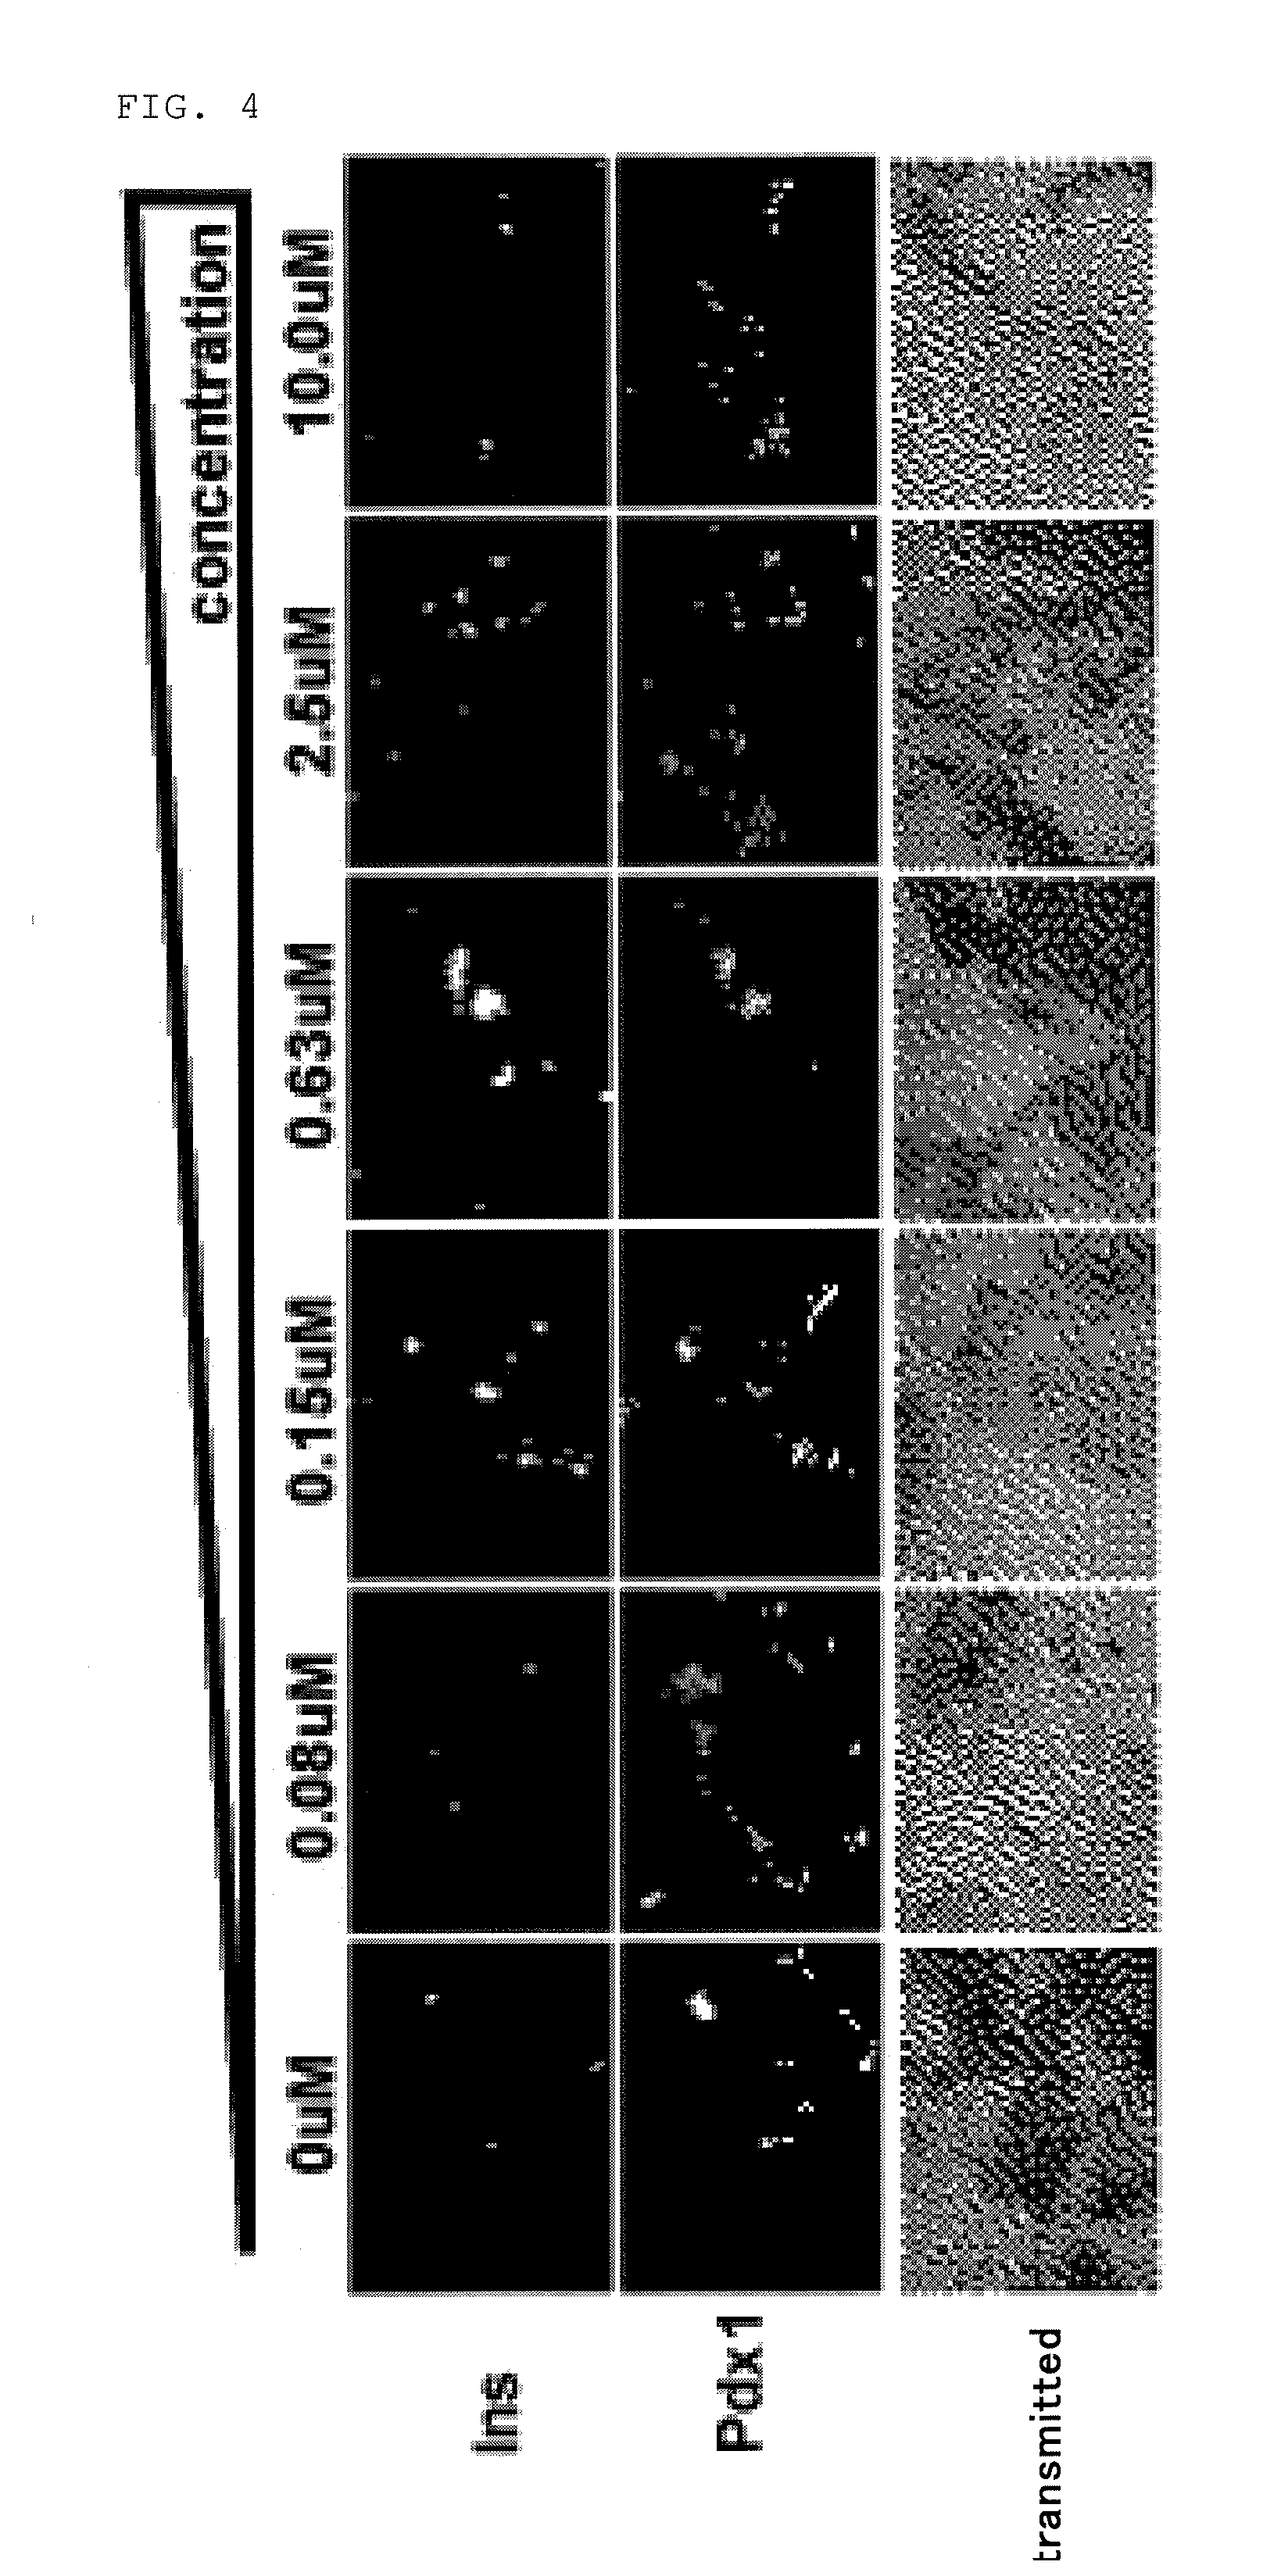 Small chemical compound which promotes induction of differentiation of stem cells into insulin-producing cells and method for inducing differentiation of stem cells into insulin-producing cells using said small chemical compound